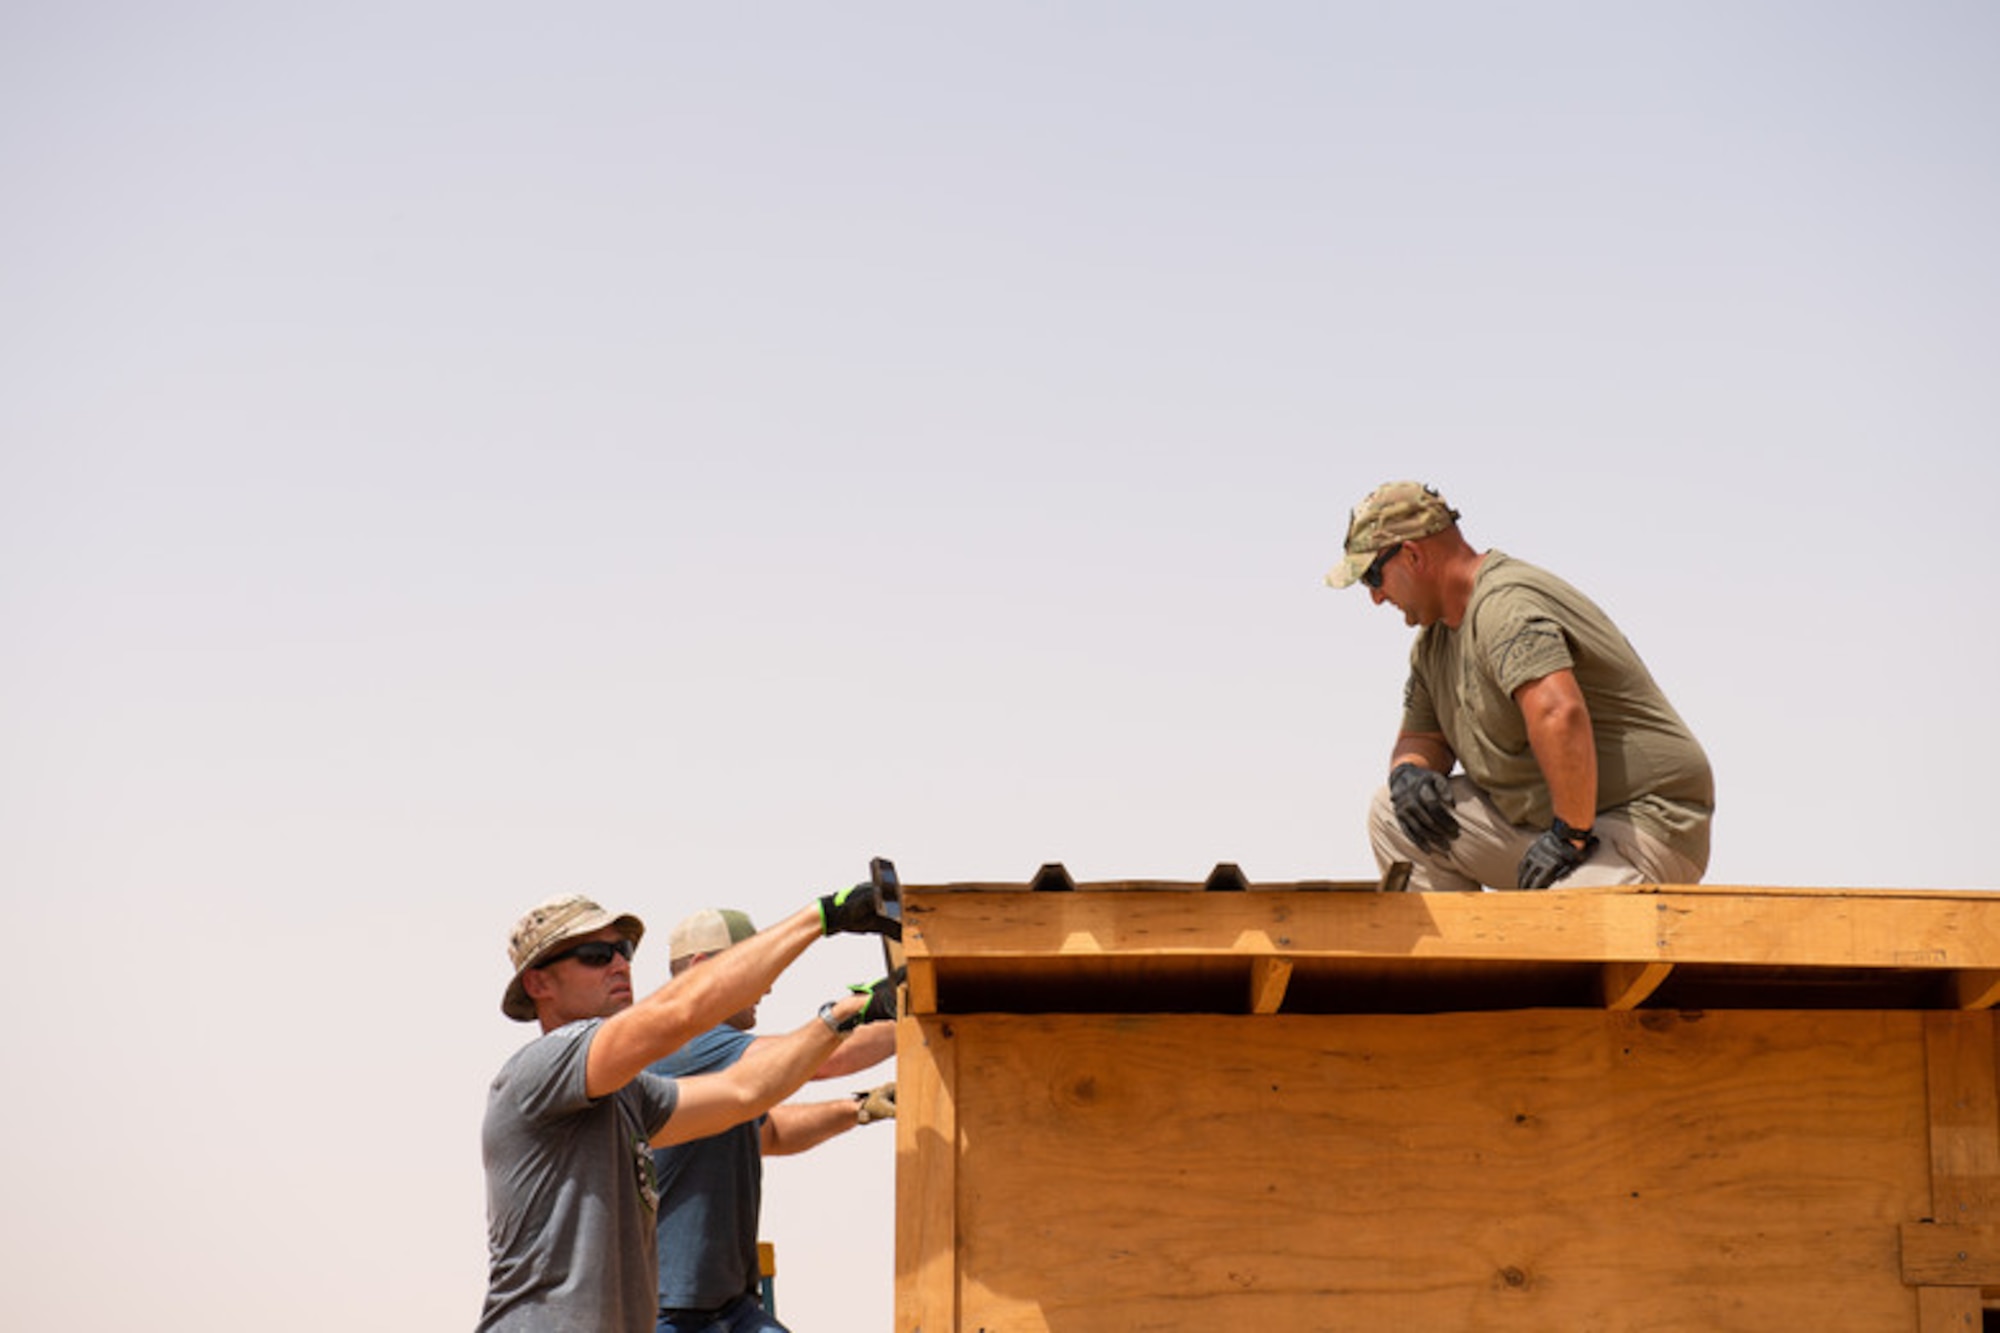 Airmen assigned to the 724th Expeditionary Air Base Squadron civil engineer flight install tin roofing on a classroom at a village in Agadez, Niger, June 27, 2019. The Airmen built the entire classroom using leftover wood from Air Base 201 and topped it off with locally purchased tin for the roof. (U.S. Air Force photo by Staff Sgt. Devin Boyer)